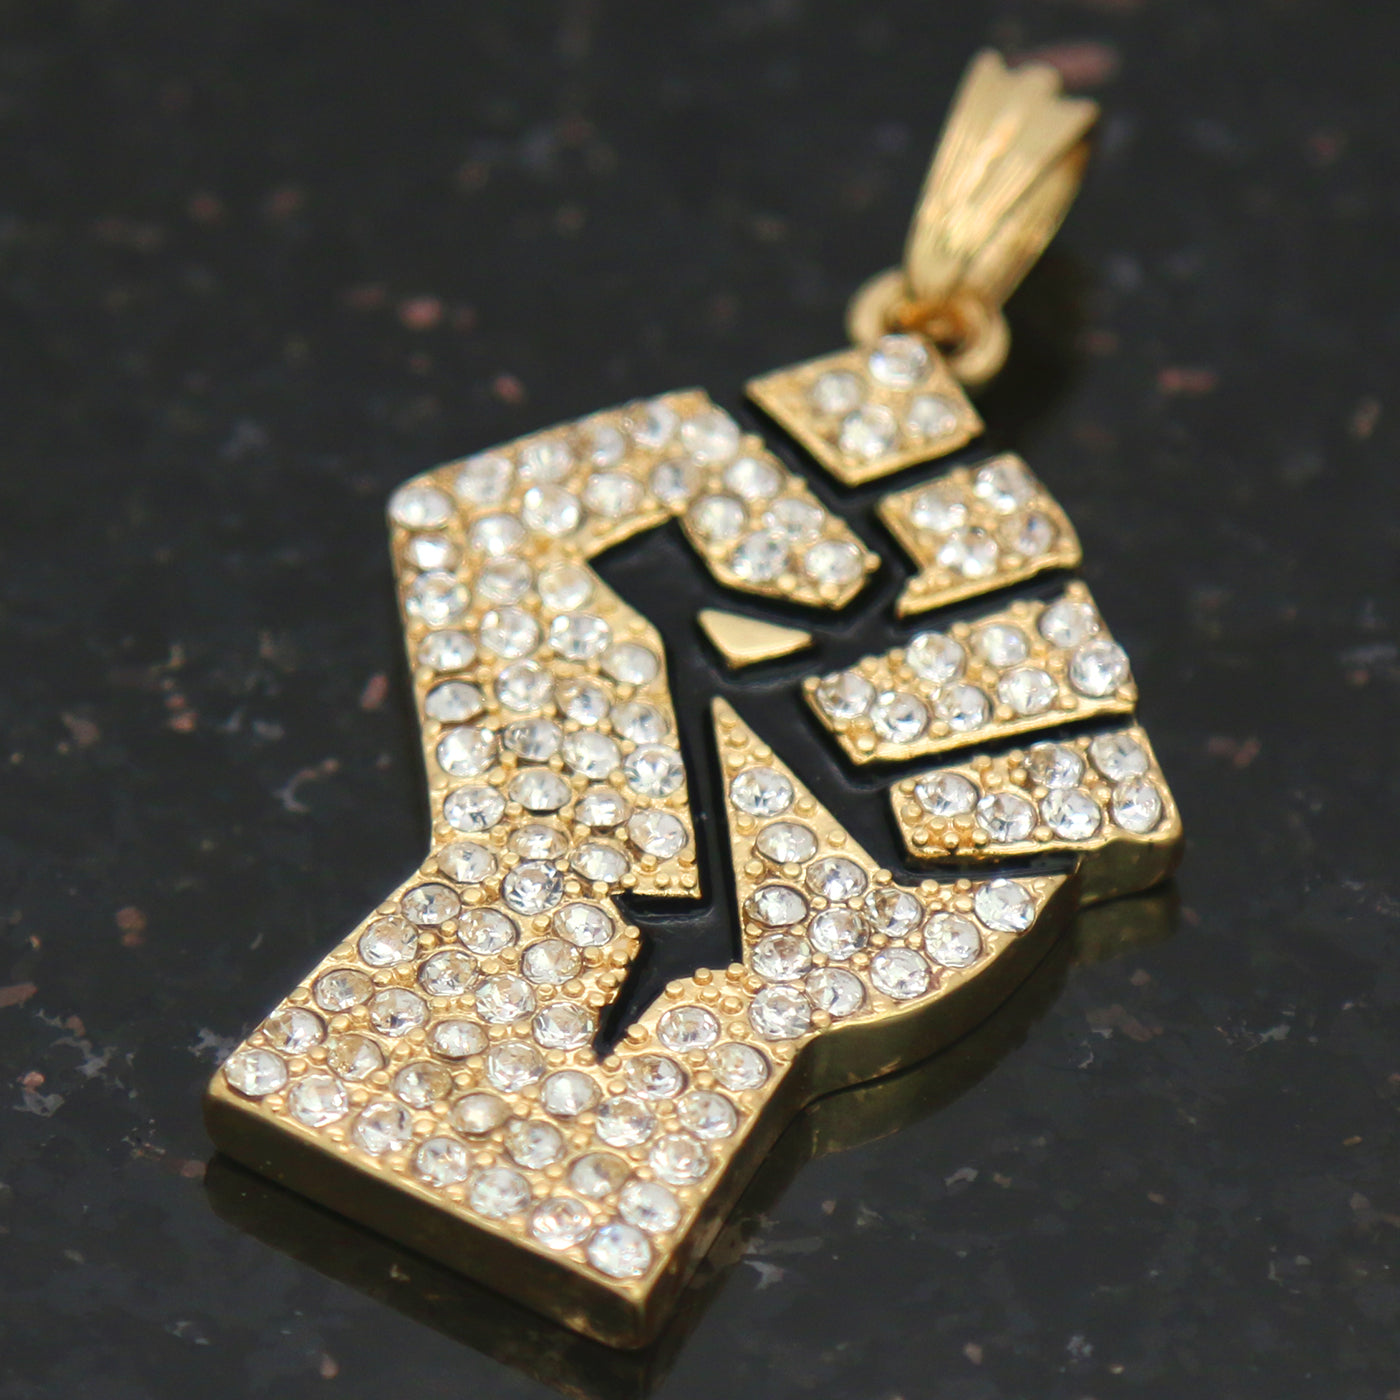 United Fist Pendant with Gold Rope Chain